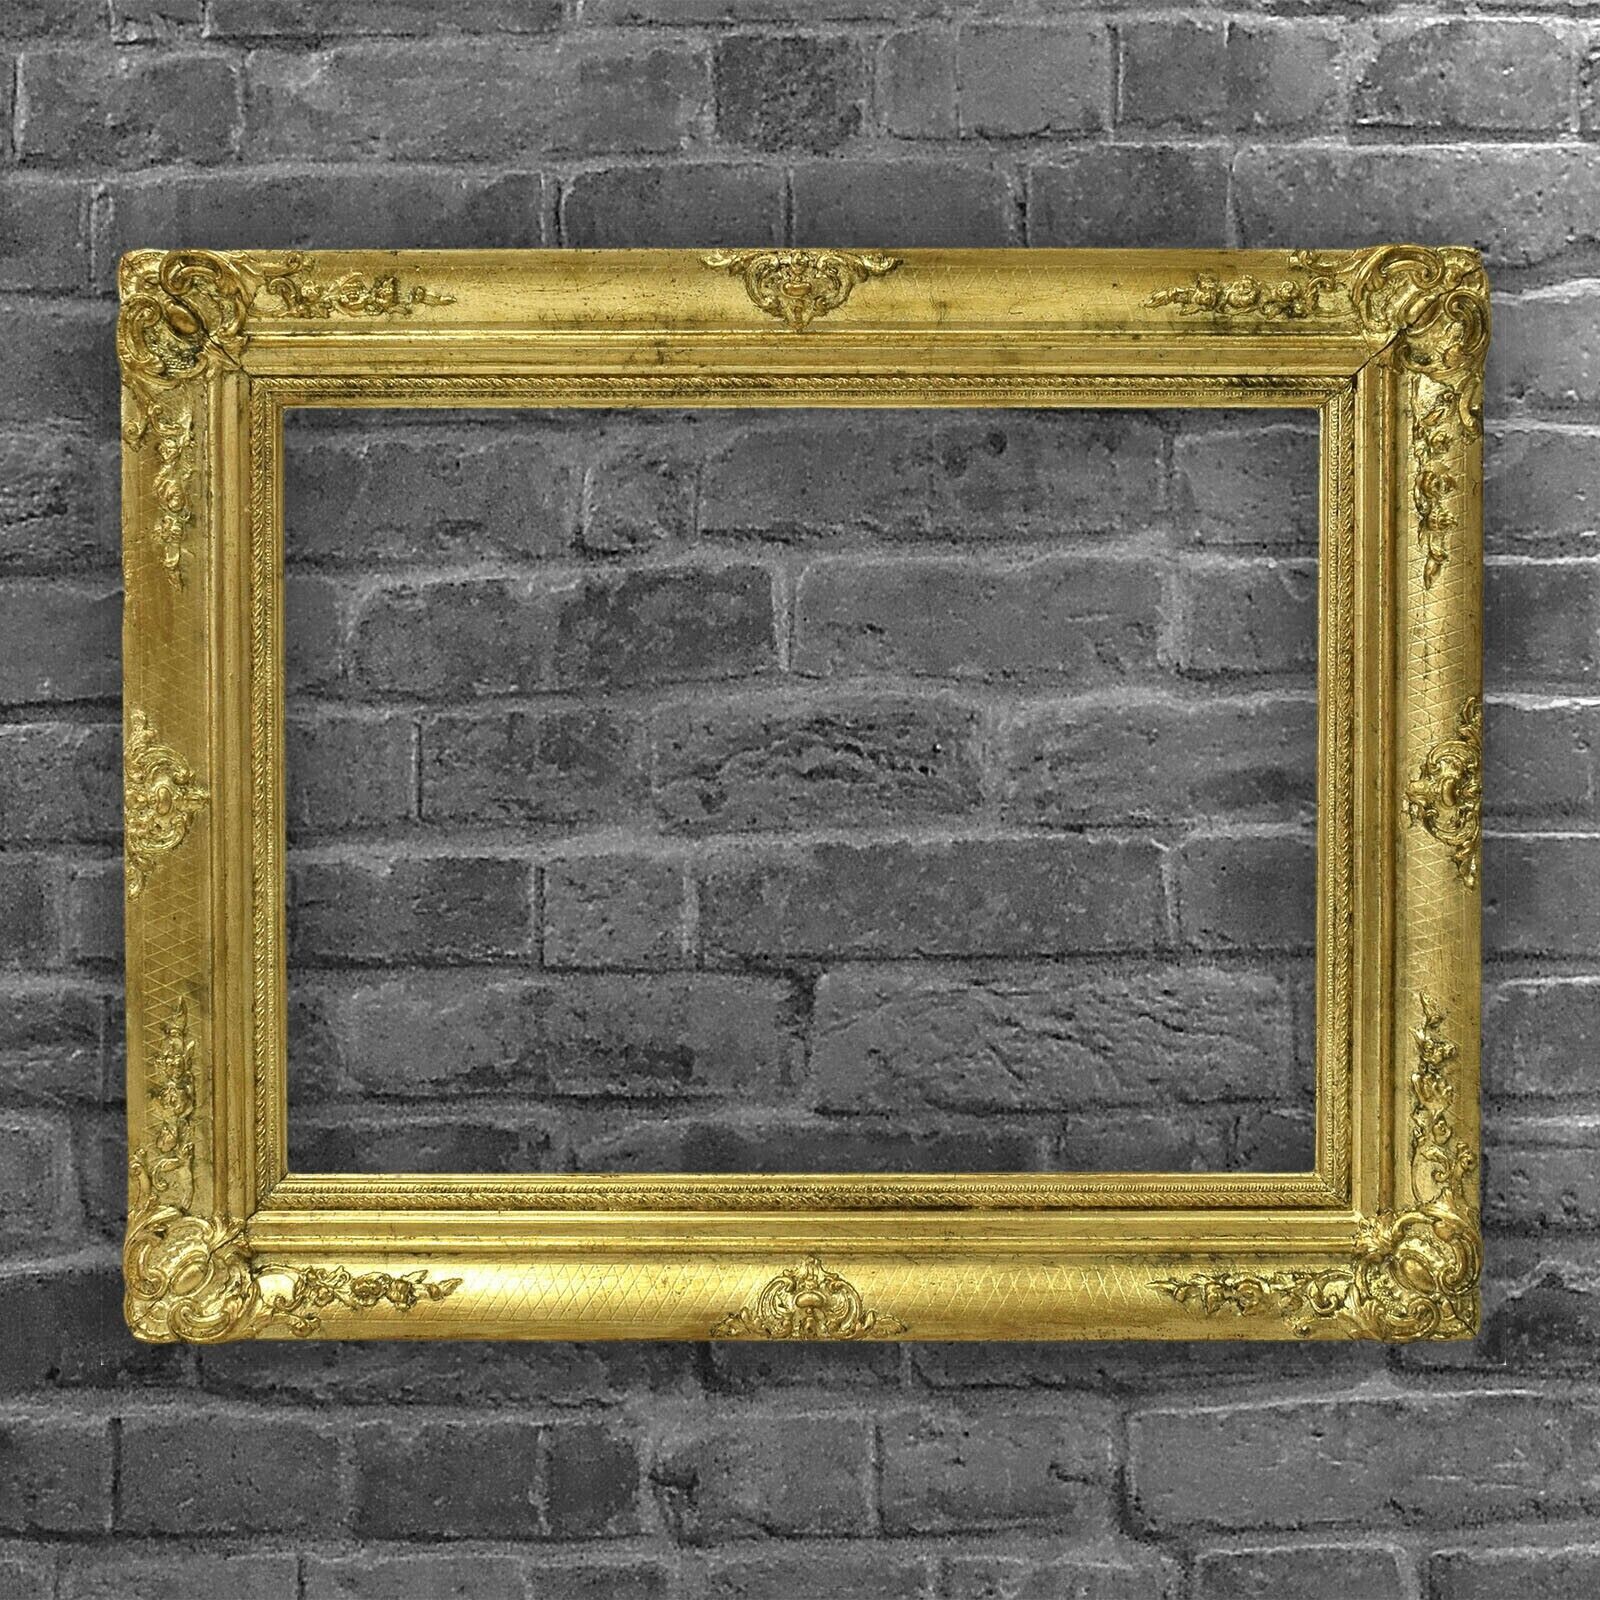 Old gilded frame with decorations fold dimensions: 22.6 x 16.7 in